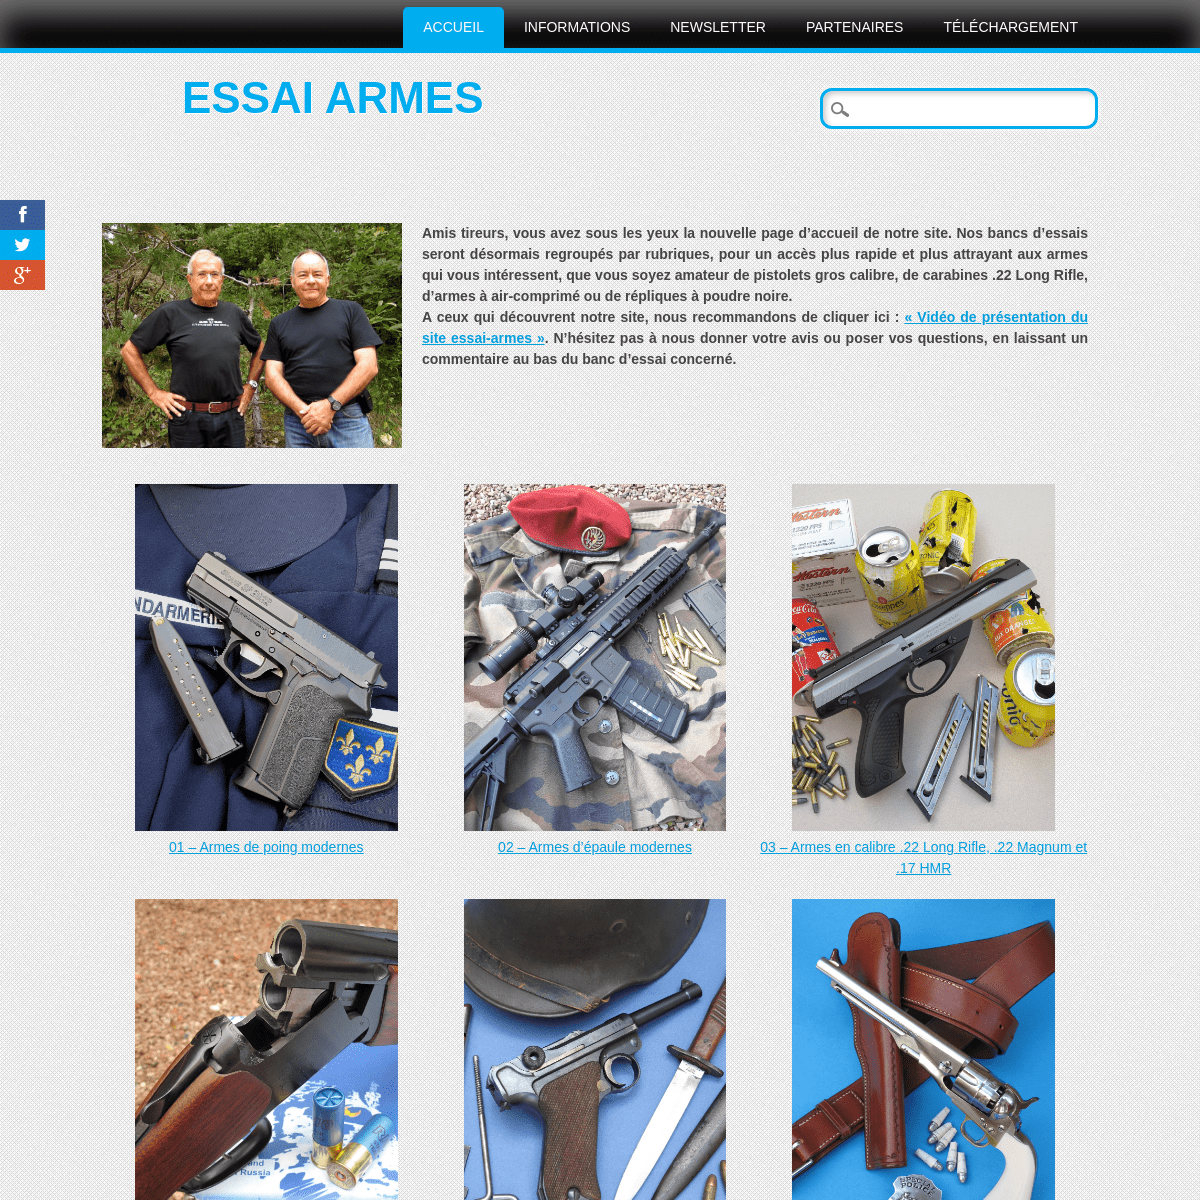 A complete backup of essai-armes.fr